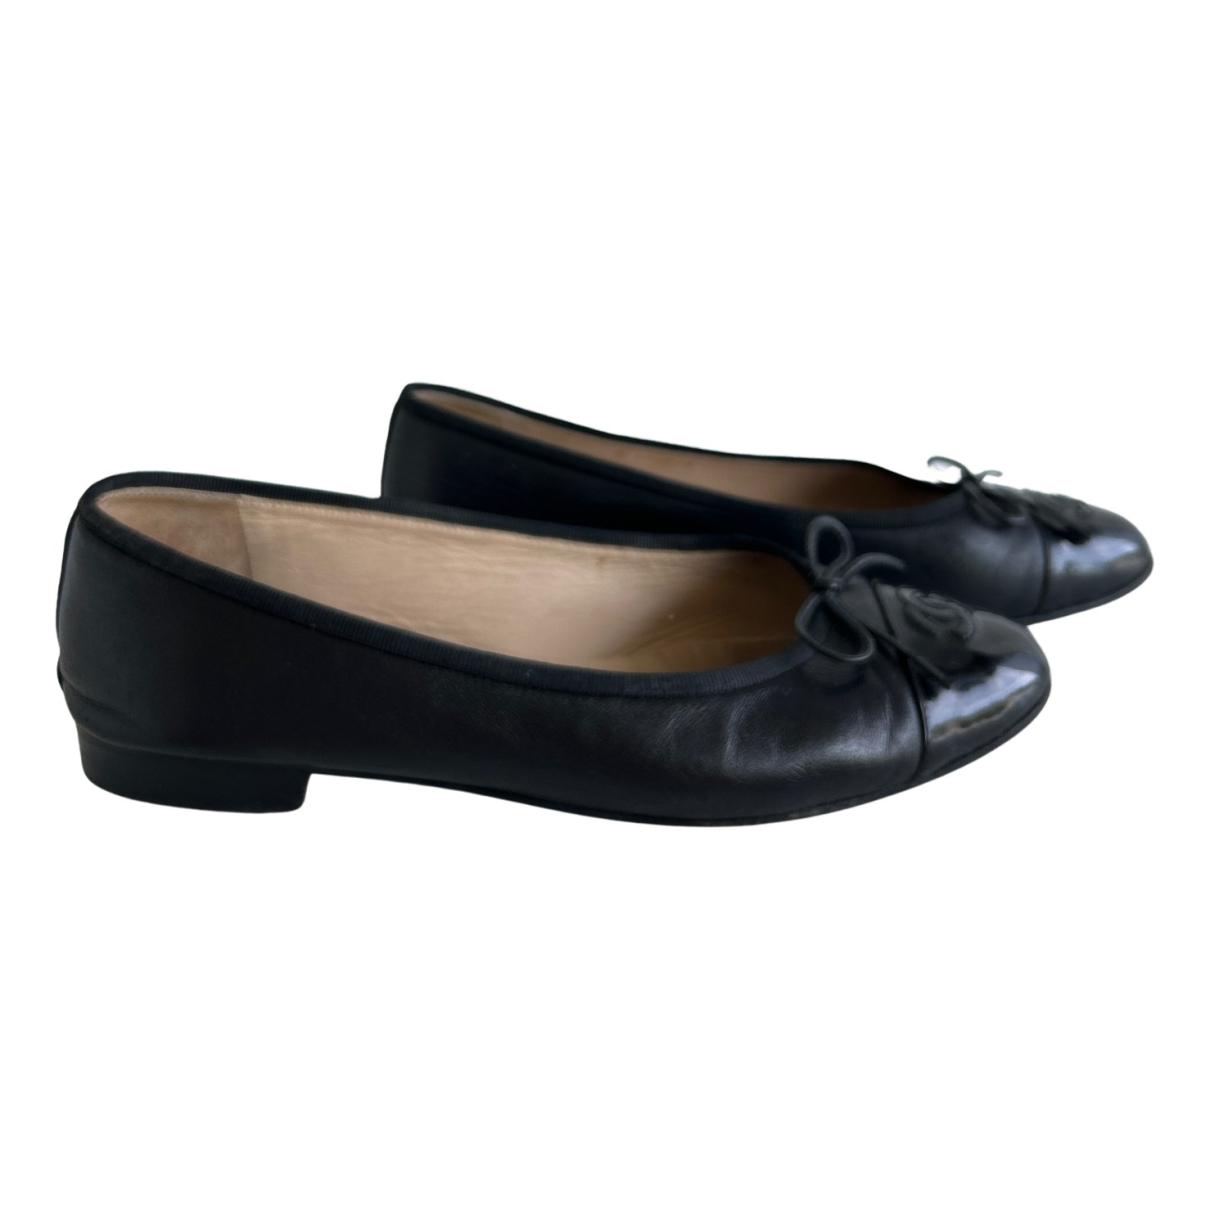 Leather ballet flats Chanel Black size 39 EU in Leather - 37664582